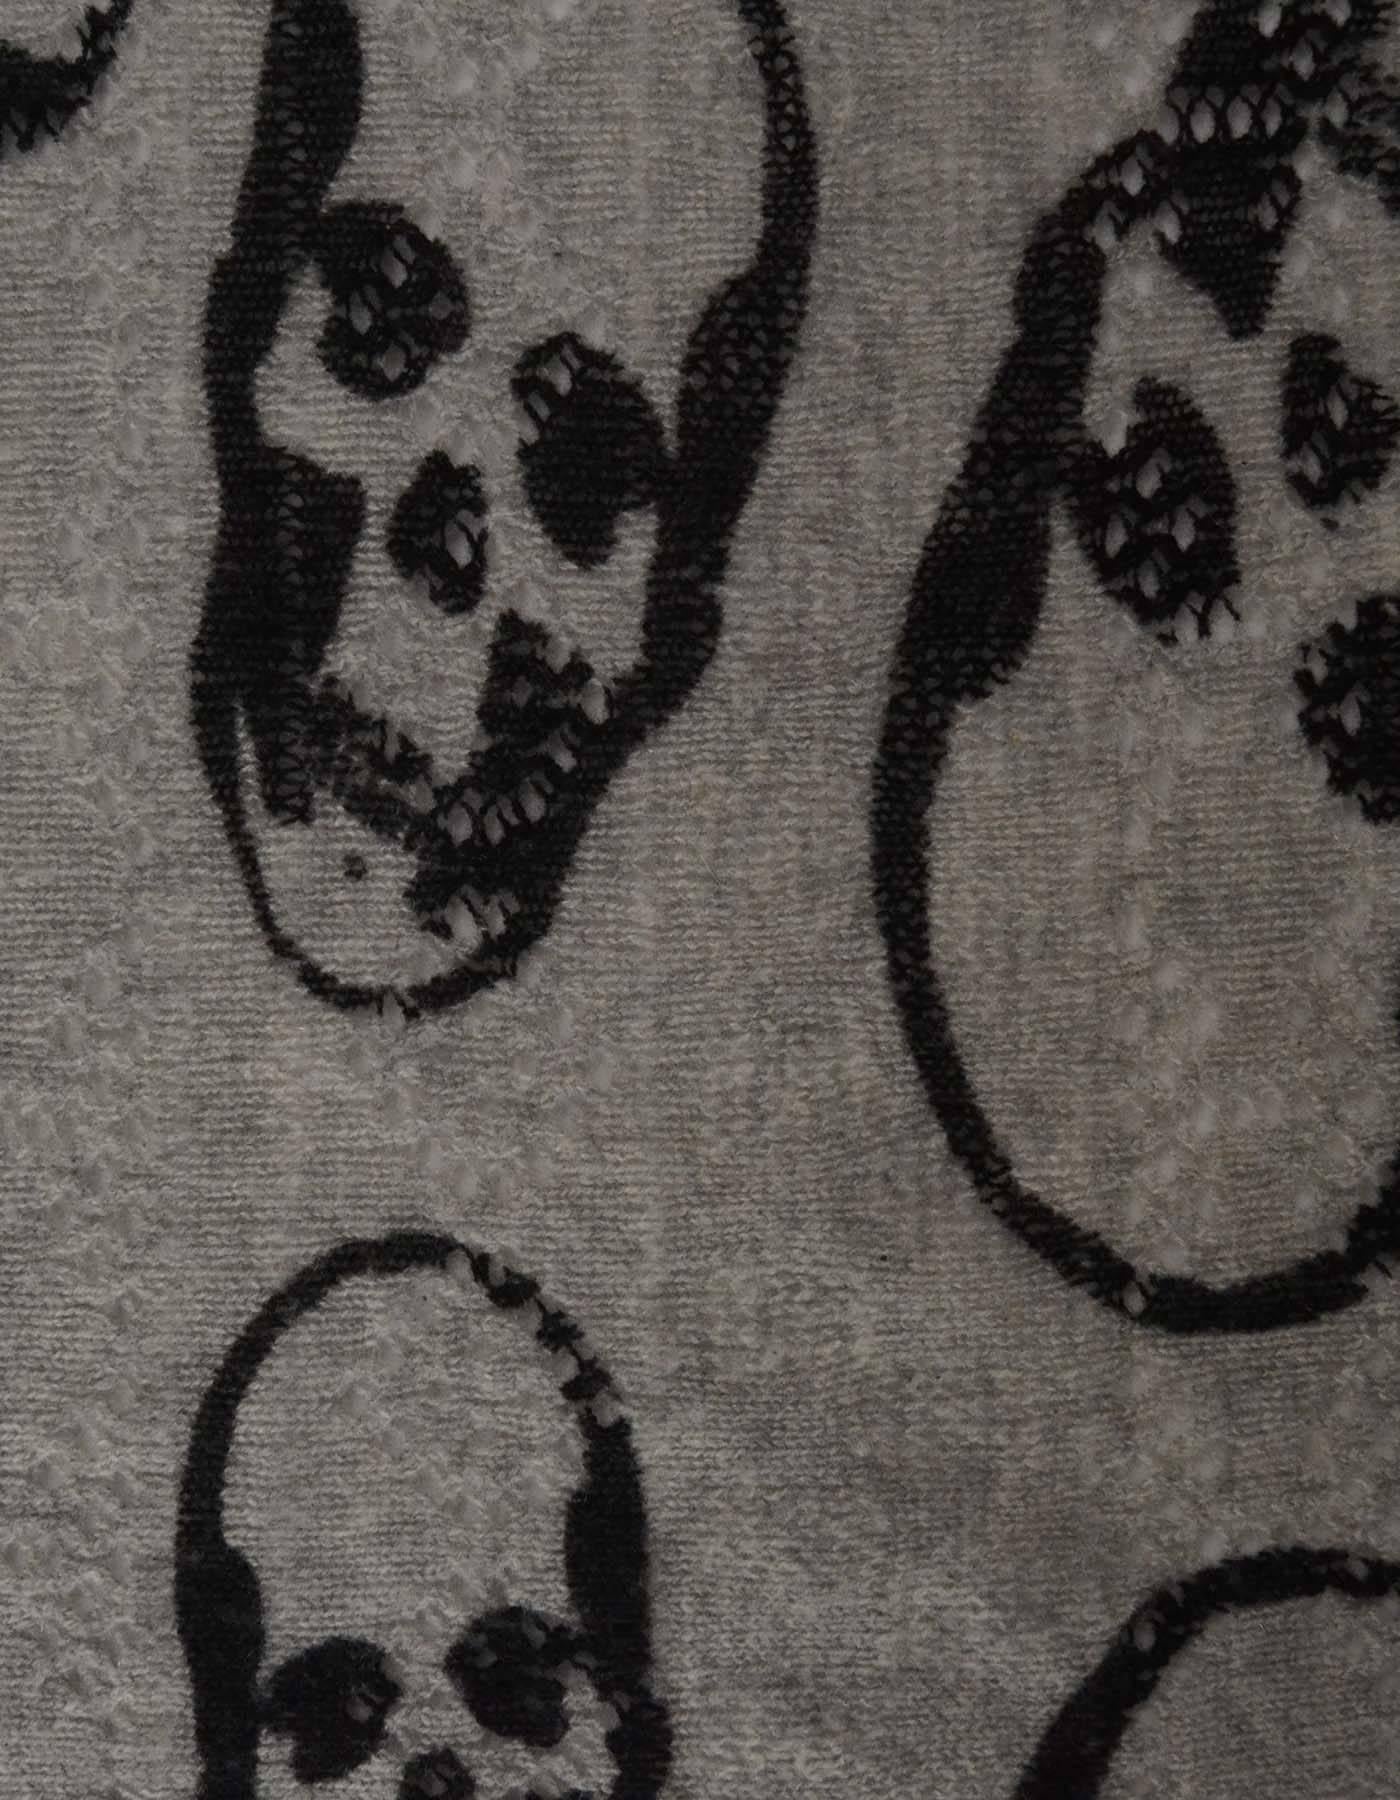 Lucien Pellat-Finet  Skull Print Cashmere Knit Scarf
Made In: Italy
Color: Grey and black
Composition: 100% cashmere
Overall Condition: Excellent pre-owned condition with the exception of some minor pilling throughout edges of